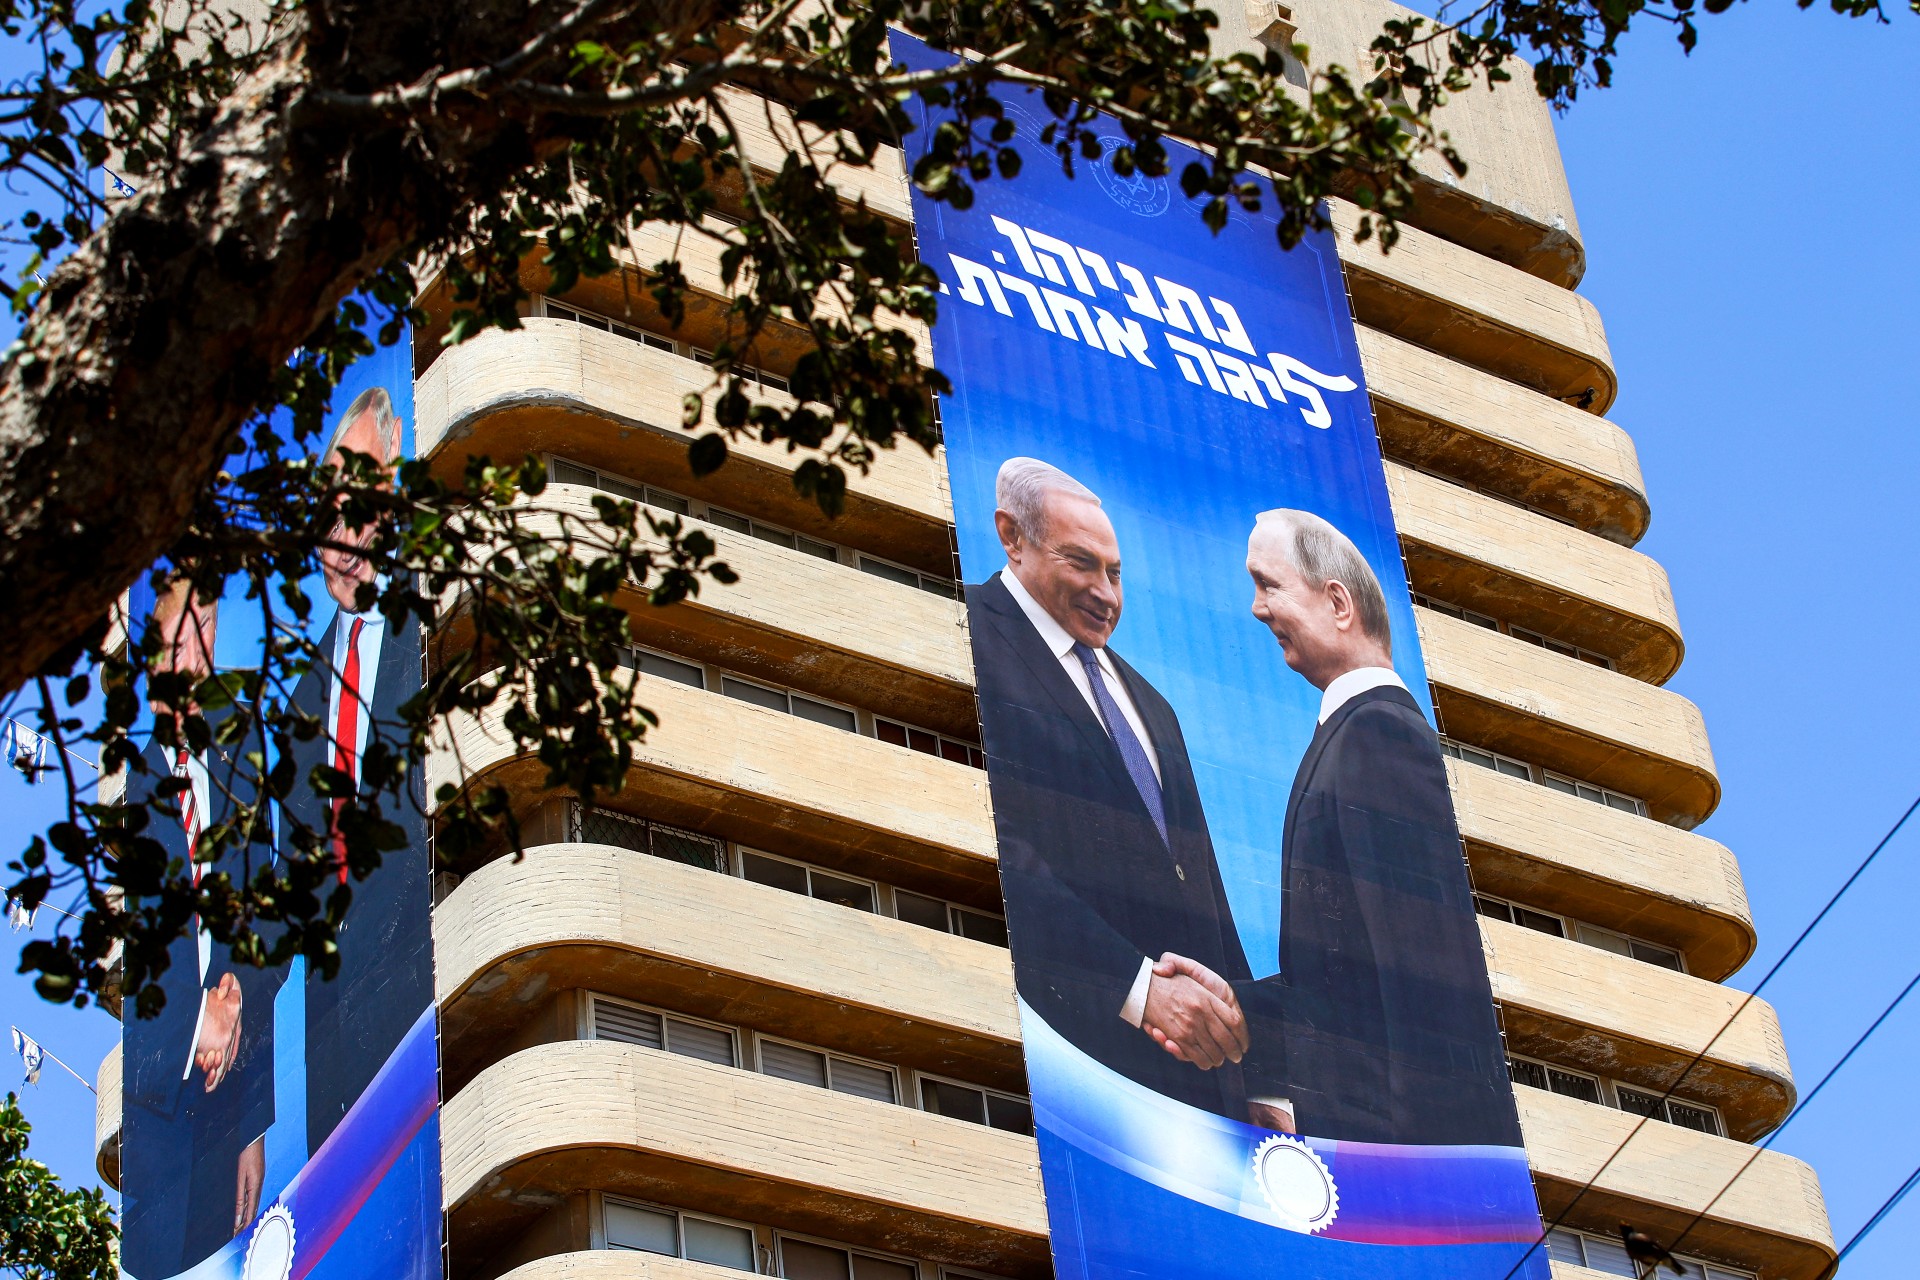 Two giant election banners hanging from a building show Benjamin Netanyahu shaking hands with Donald Trump and Russian President Vladimir (AFP)